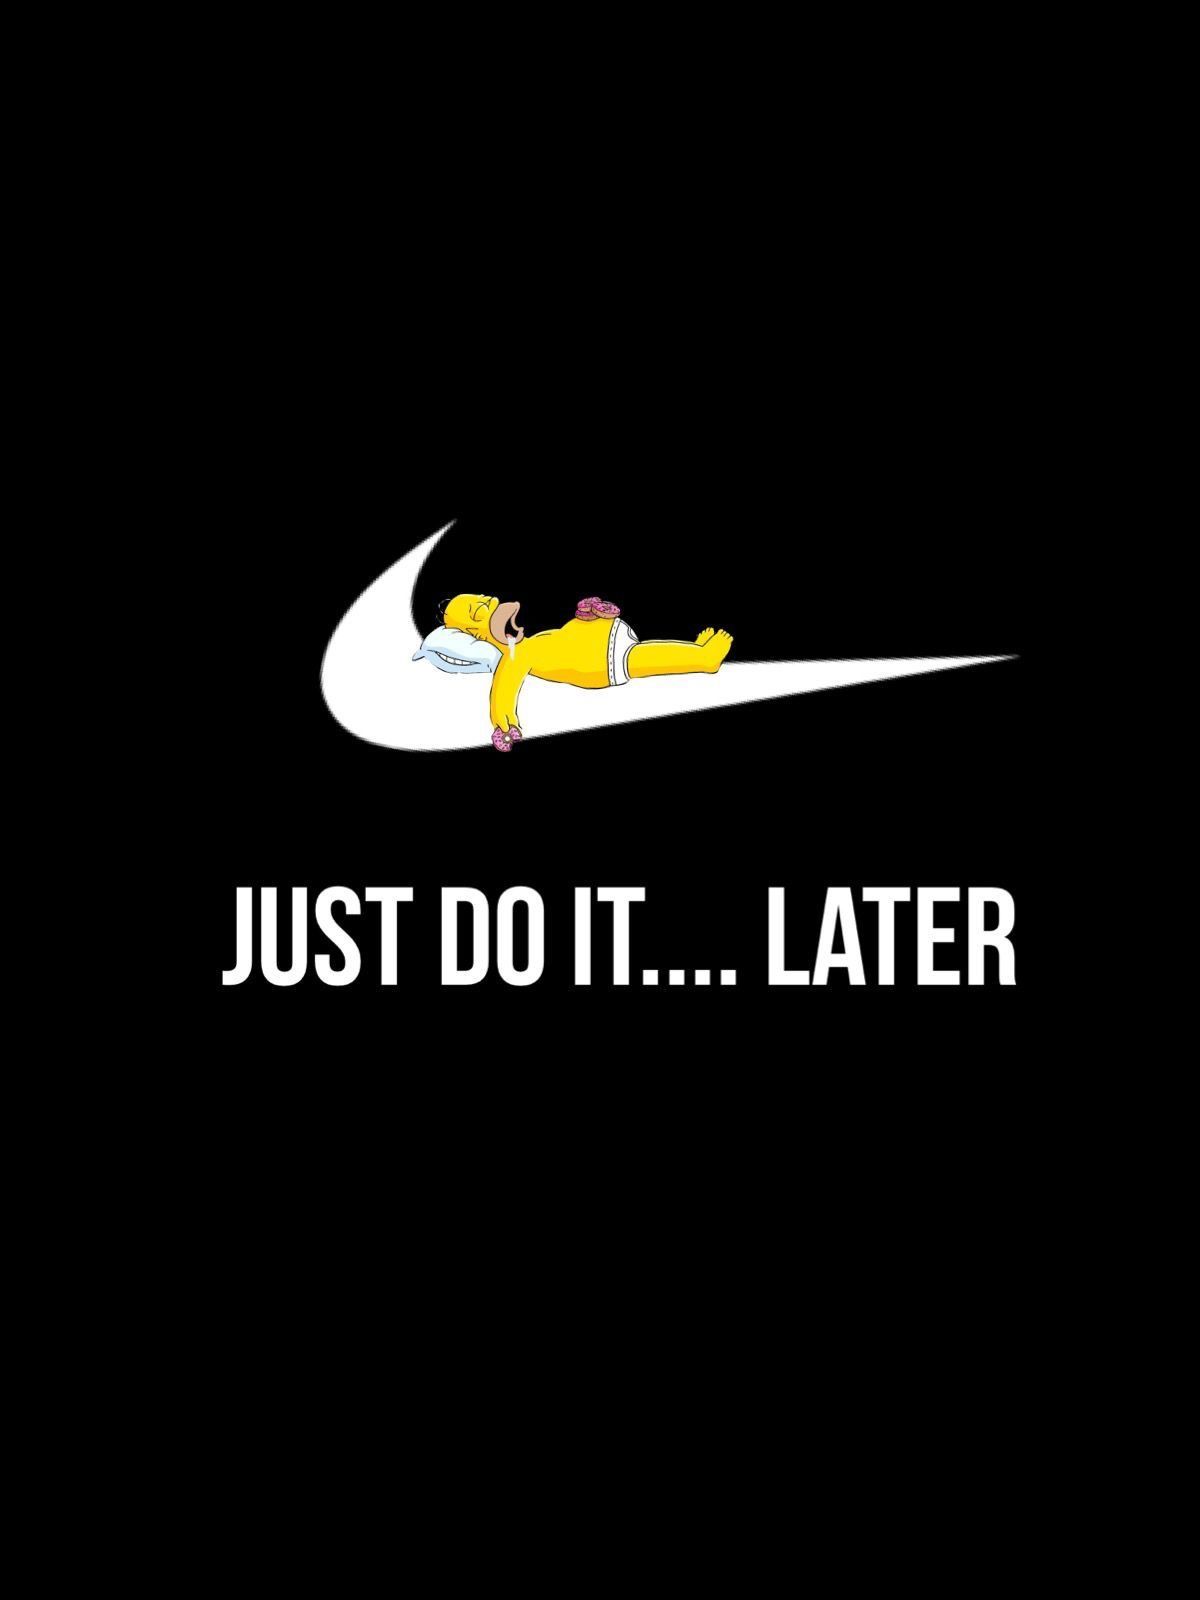 Homer Simpson # Just Do IT.LATER. Funny phone wallpaper, Funny